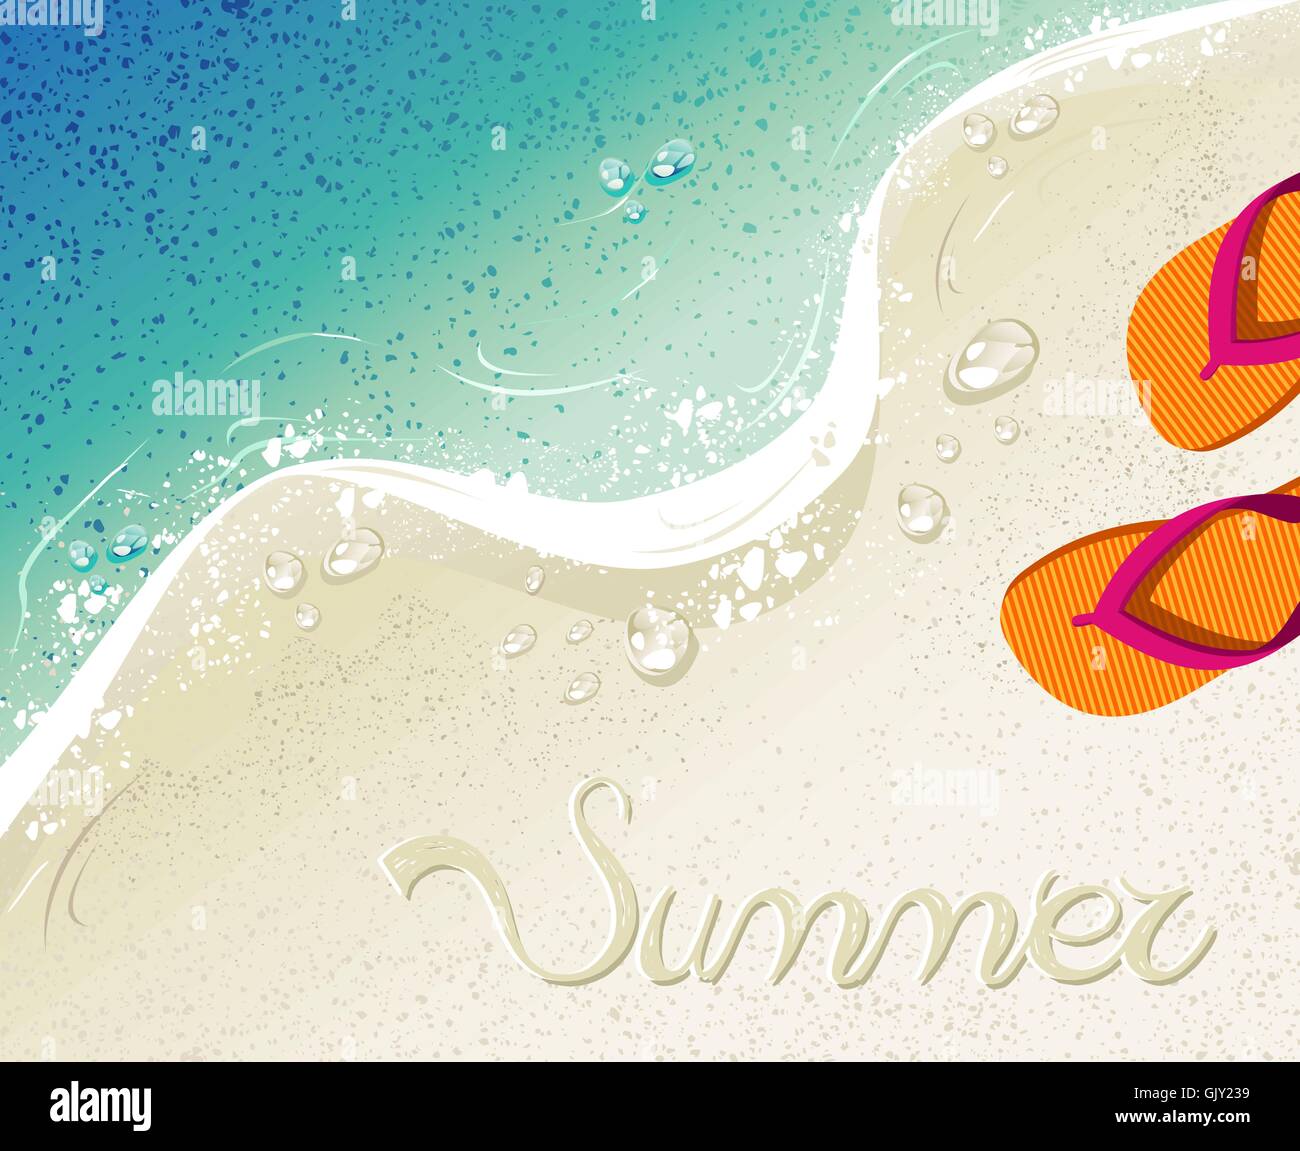 Flip flops Summer time holiday background Stock Vector